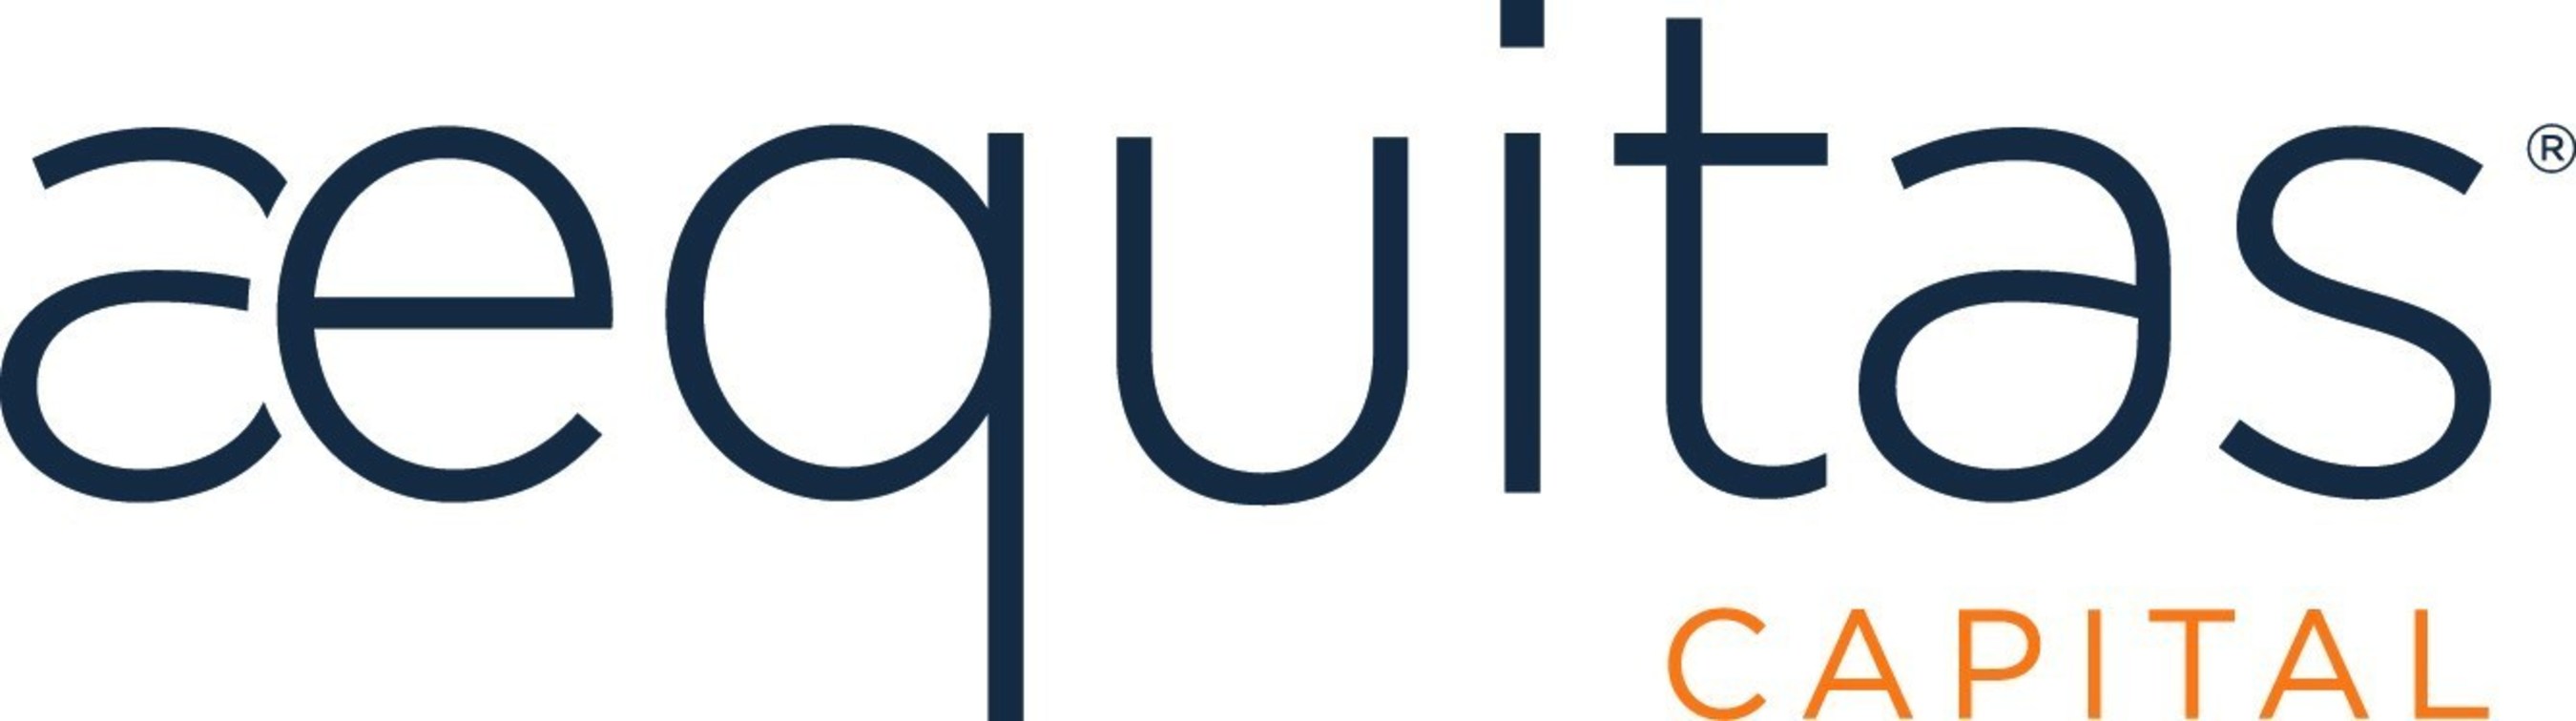 Aequitas Capital is an alternative investment management company dedicated to innovation, discipline, and excellence. With proven expertise in finance, management, and technology, and a focus on undervalued, high-yielding strategies, Aequitas sources, structures, and implements Private Credit and Private Equity solutions, benefiting the institutions and high-net-worth clients that trust us as a valuable investment partner. Please visit www.aequitascapital.com